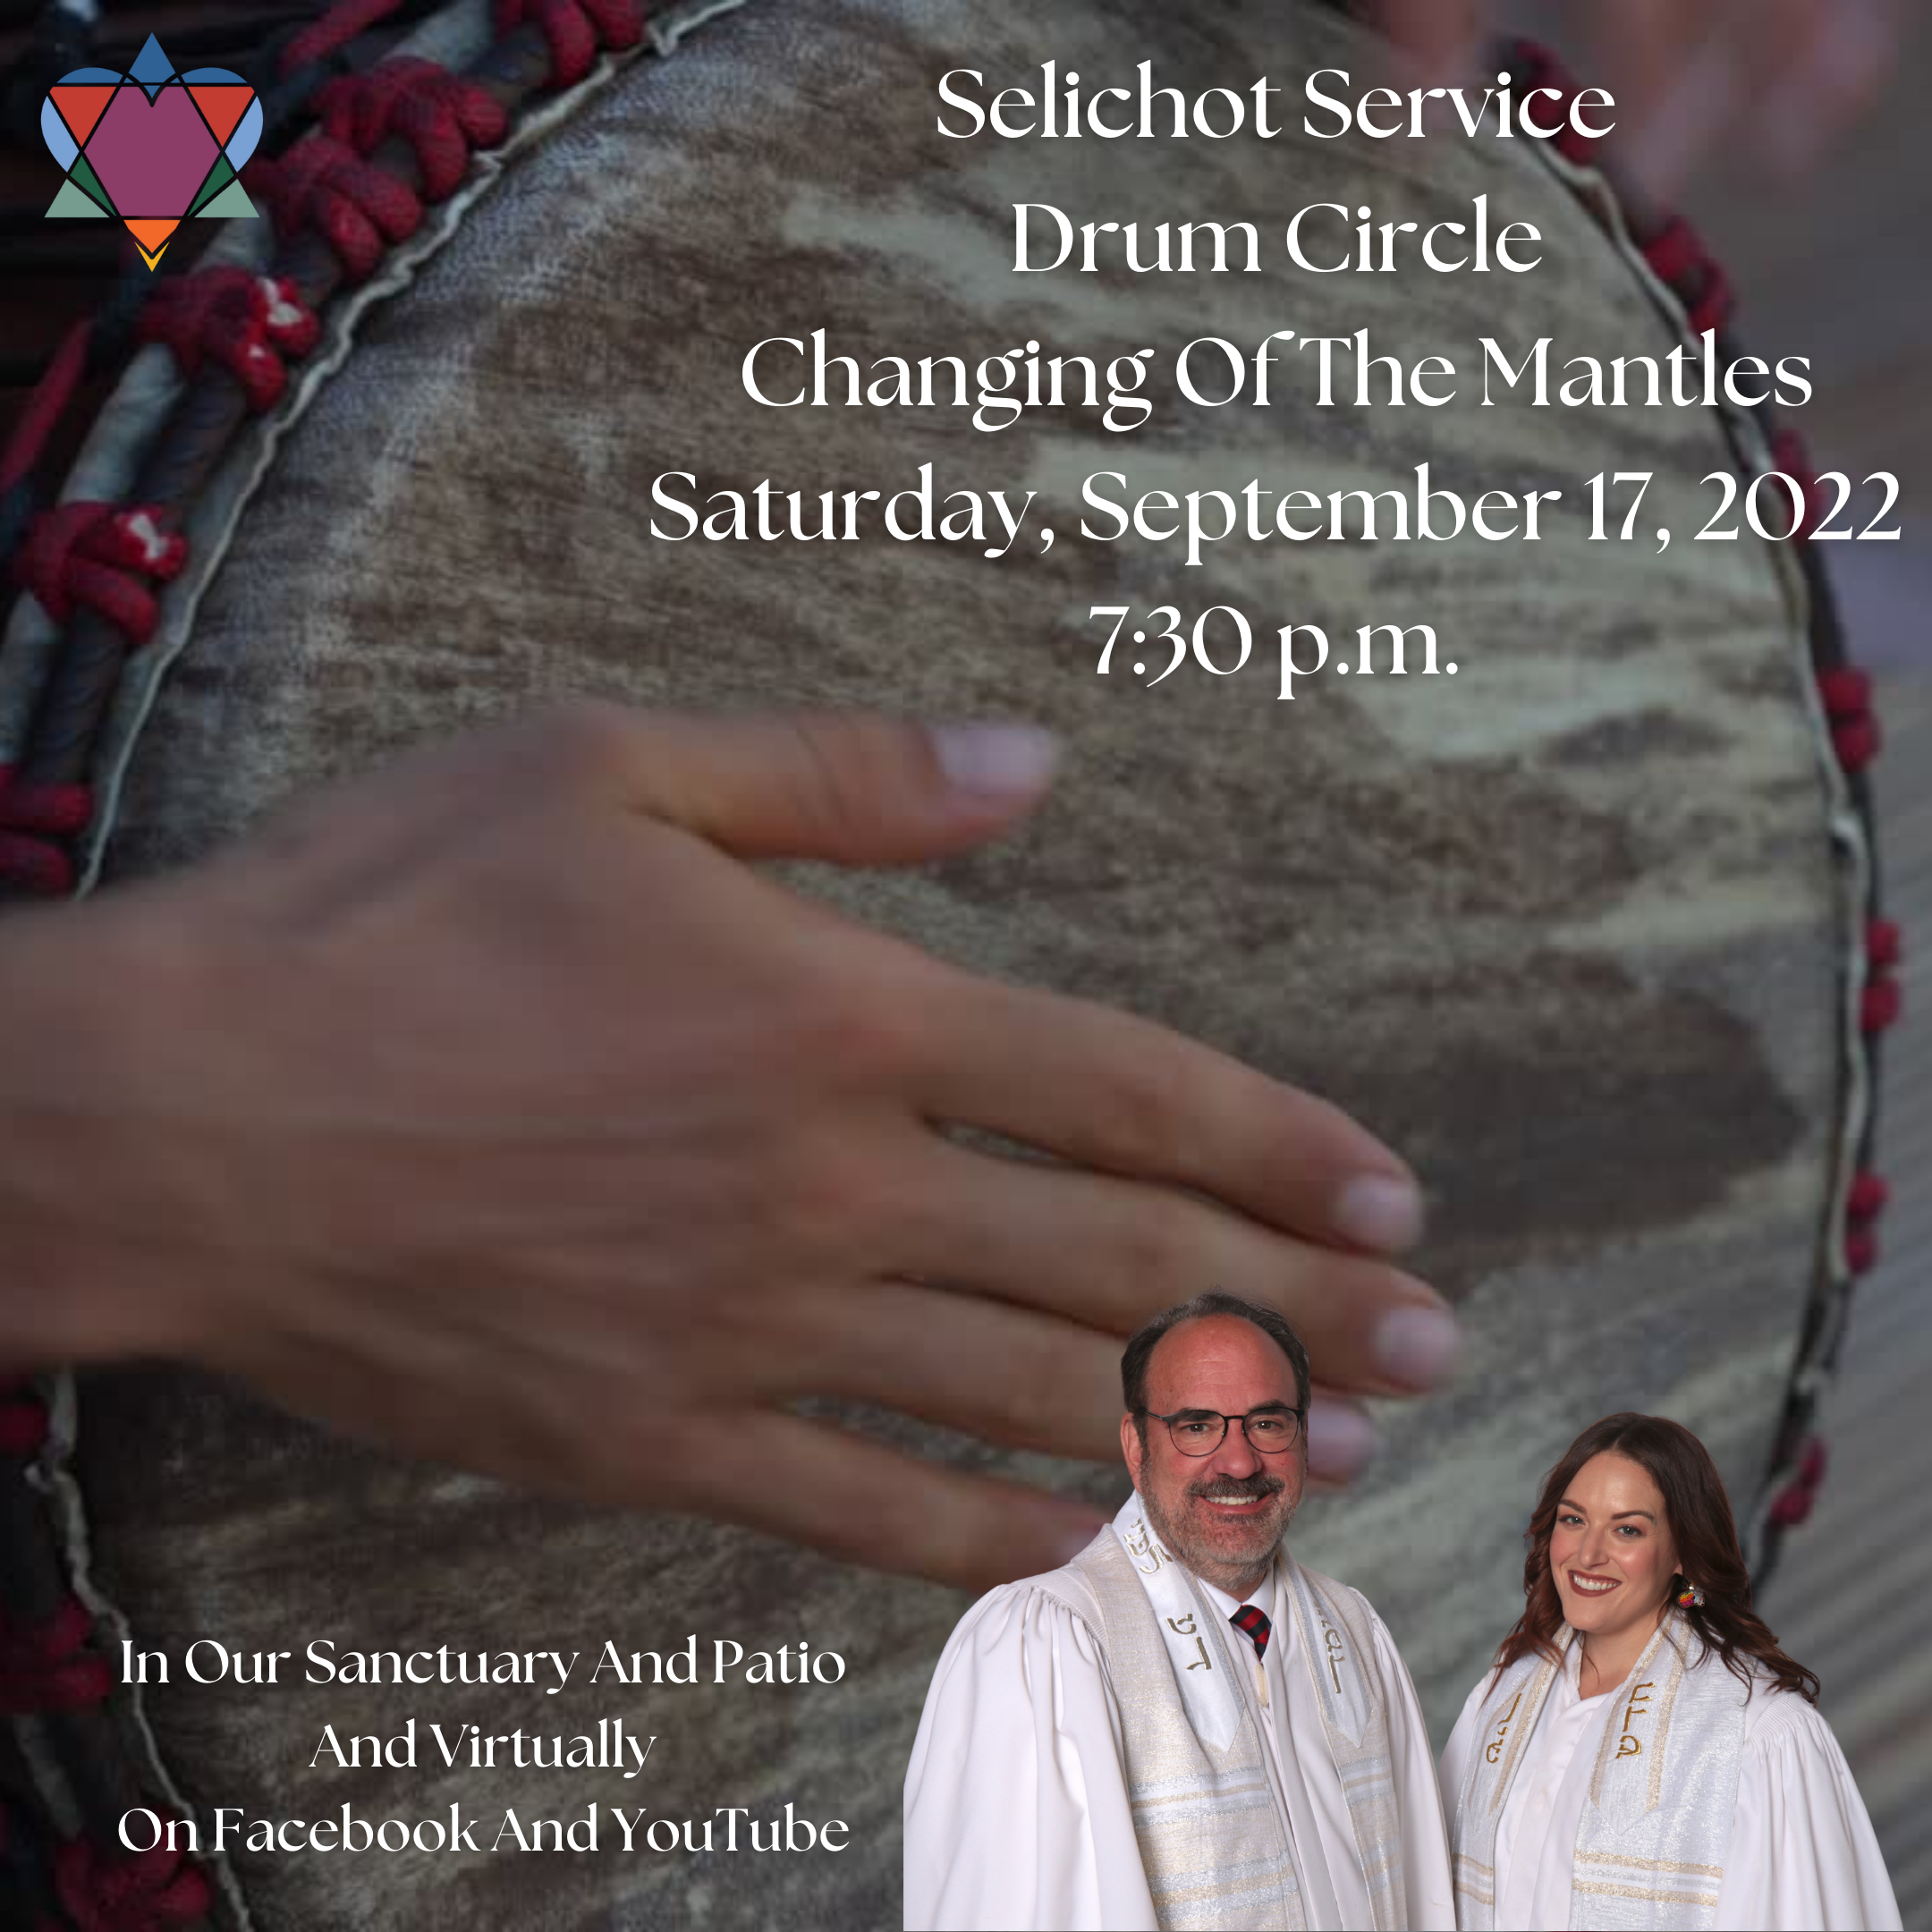 SELICHOT SERVICE, DRUM CIRCLE, CHANGING OF THE MANTLES